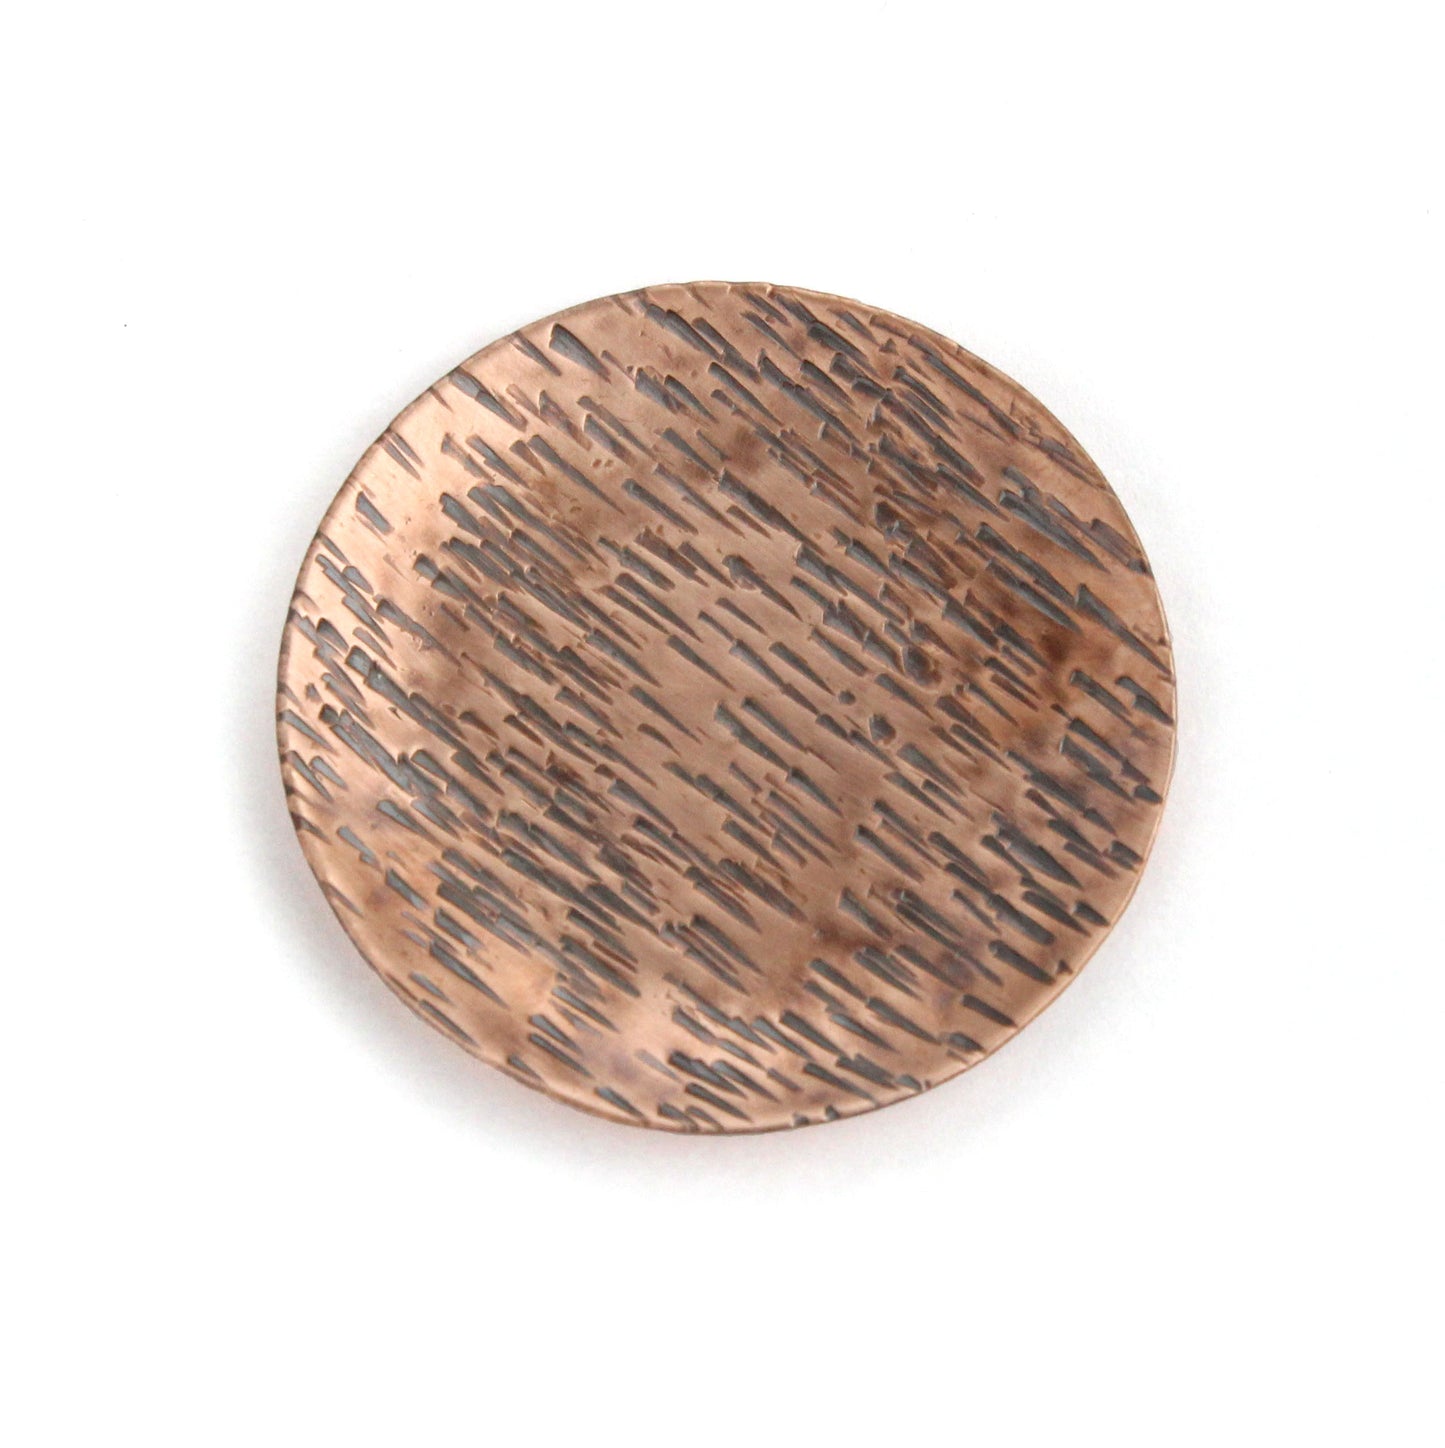 Small copper ring jewelry or trinket dish with a hammered texture resembling birch bark. The edges are curved up to form a shallow bowl.